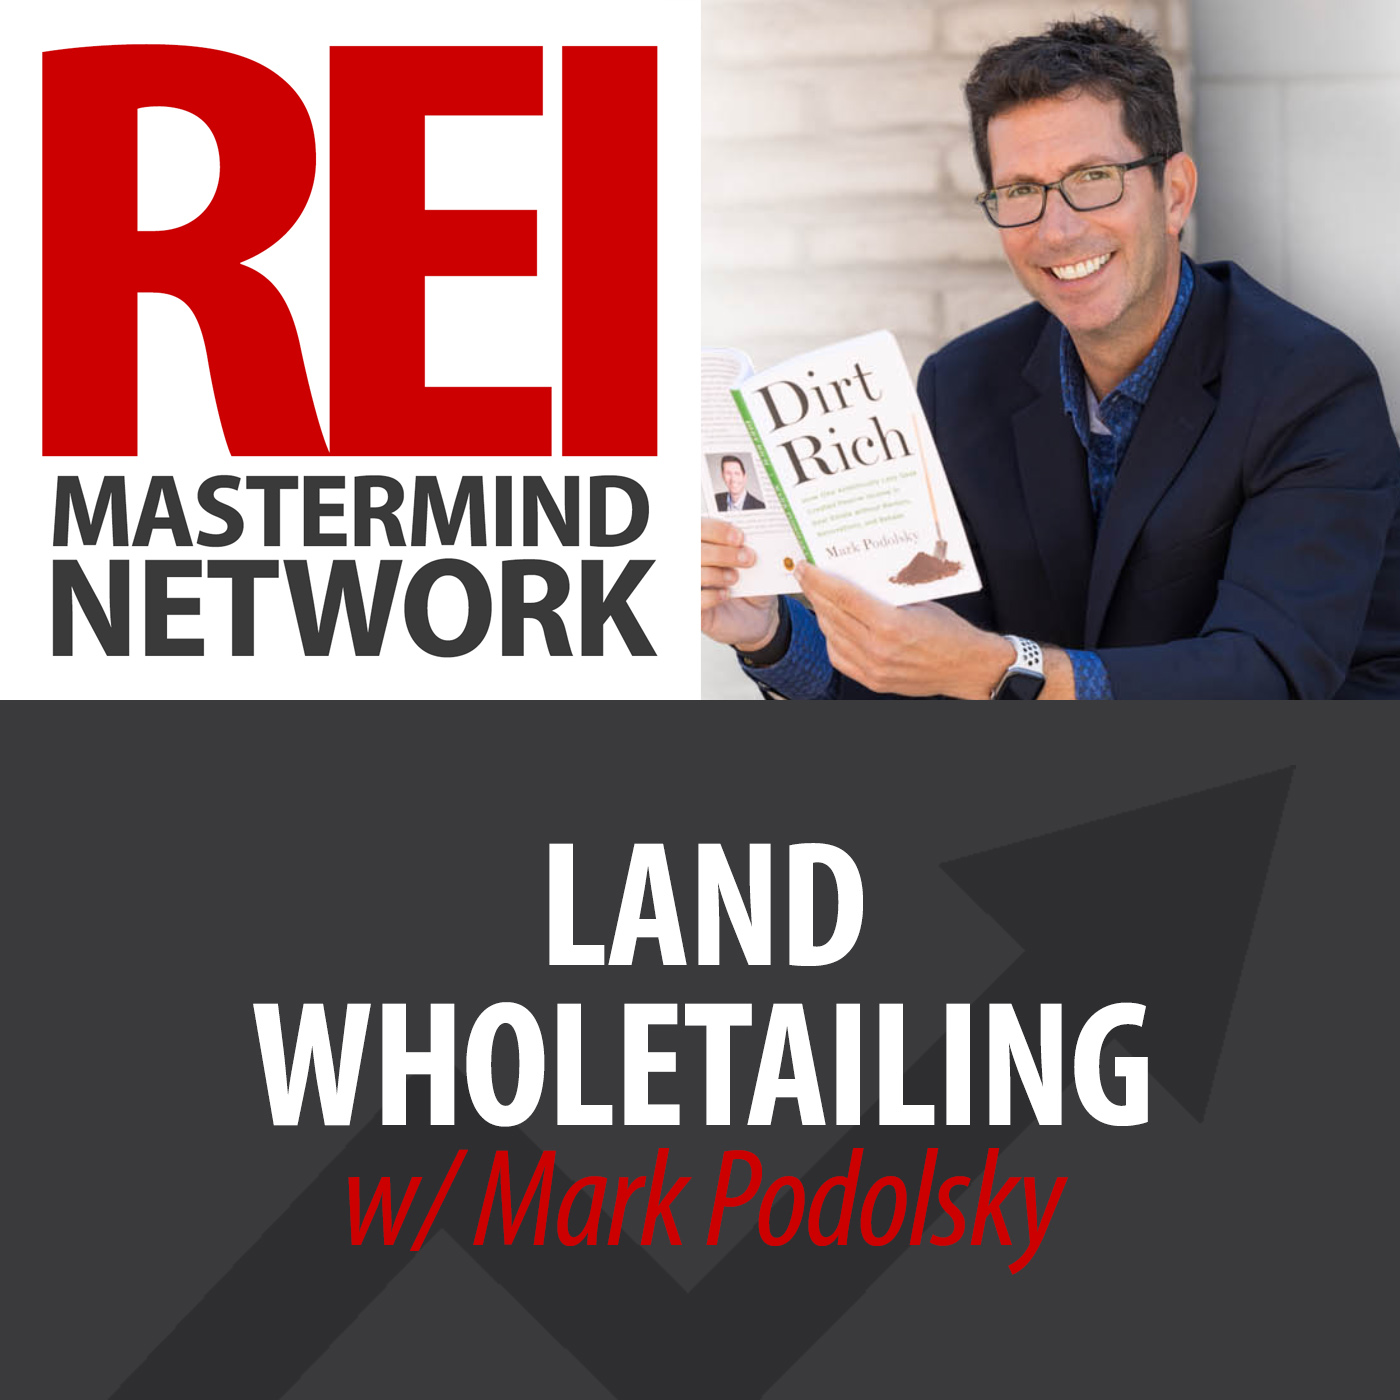 Land Wholetailing with "The Land Geek" Mark Podolsky